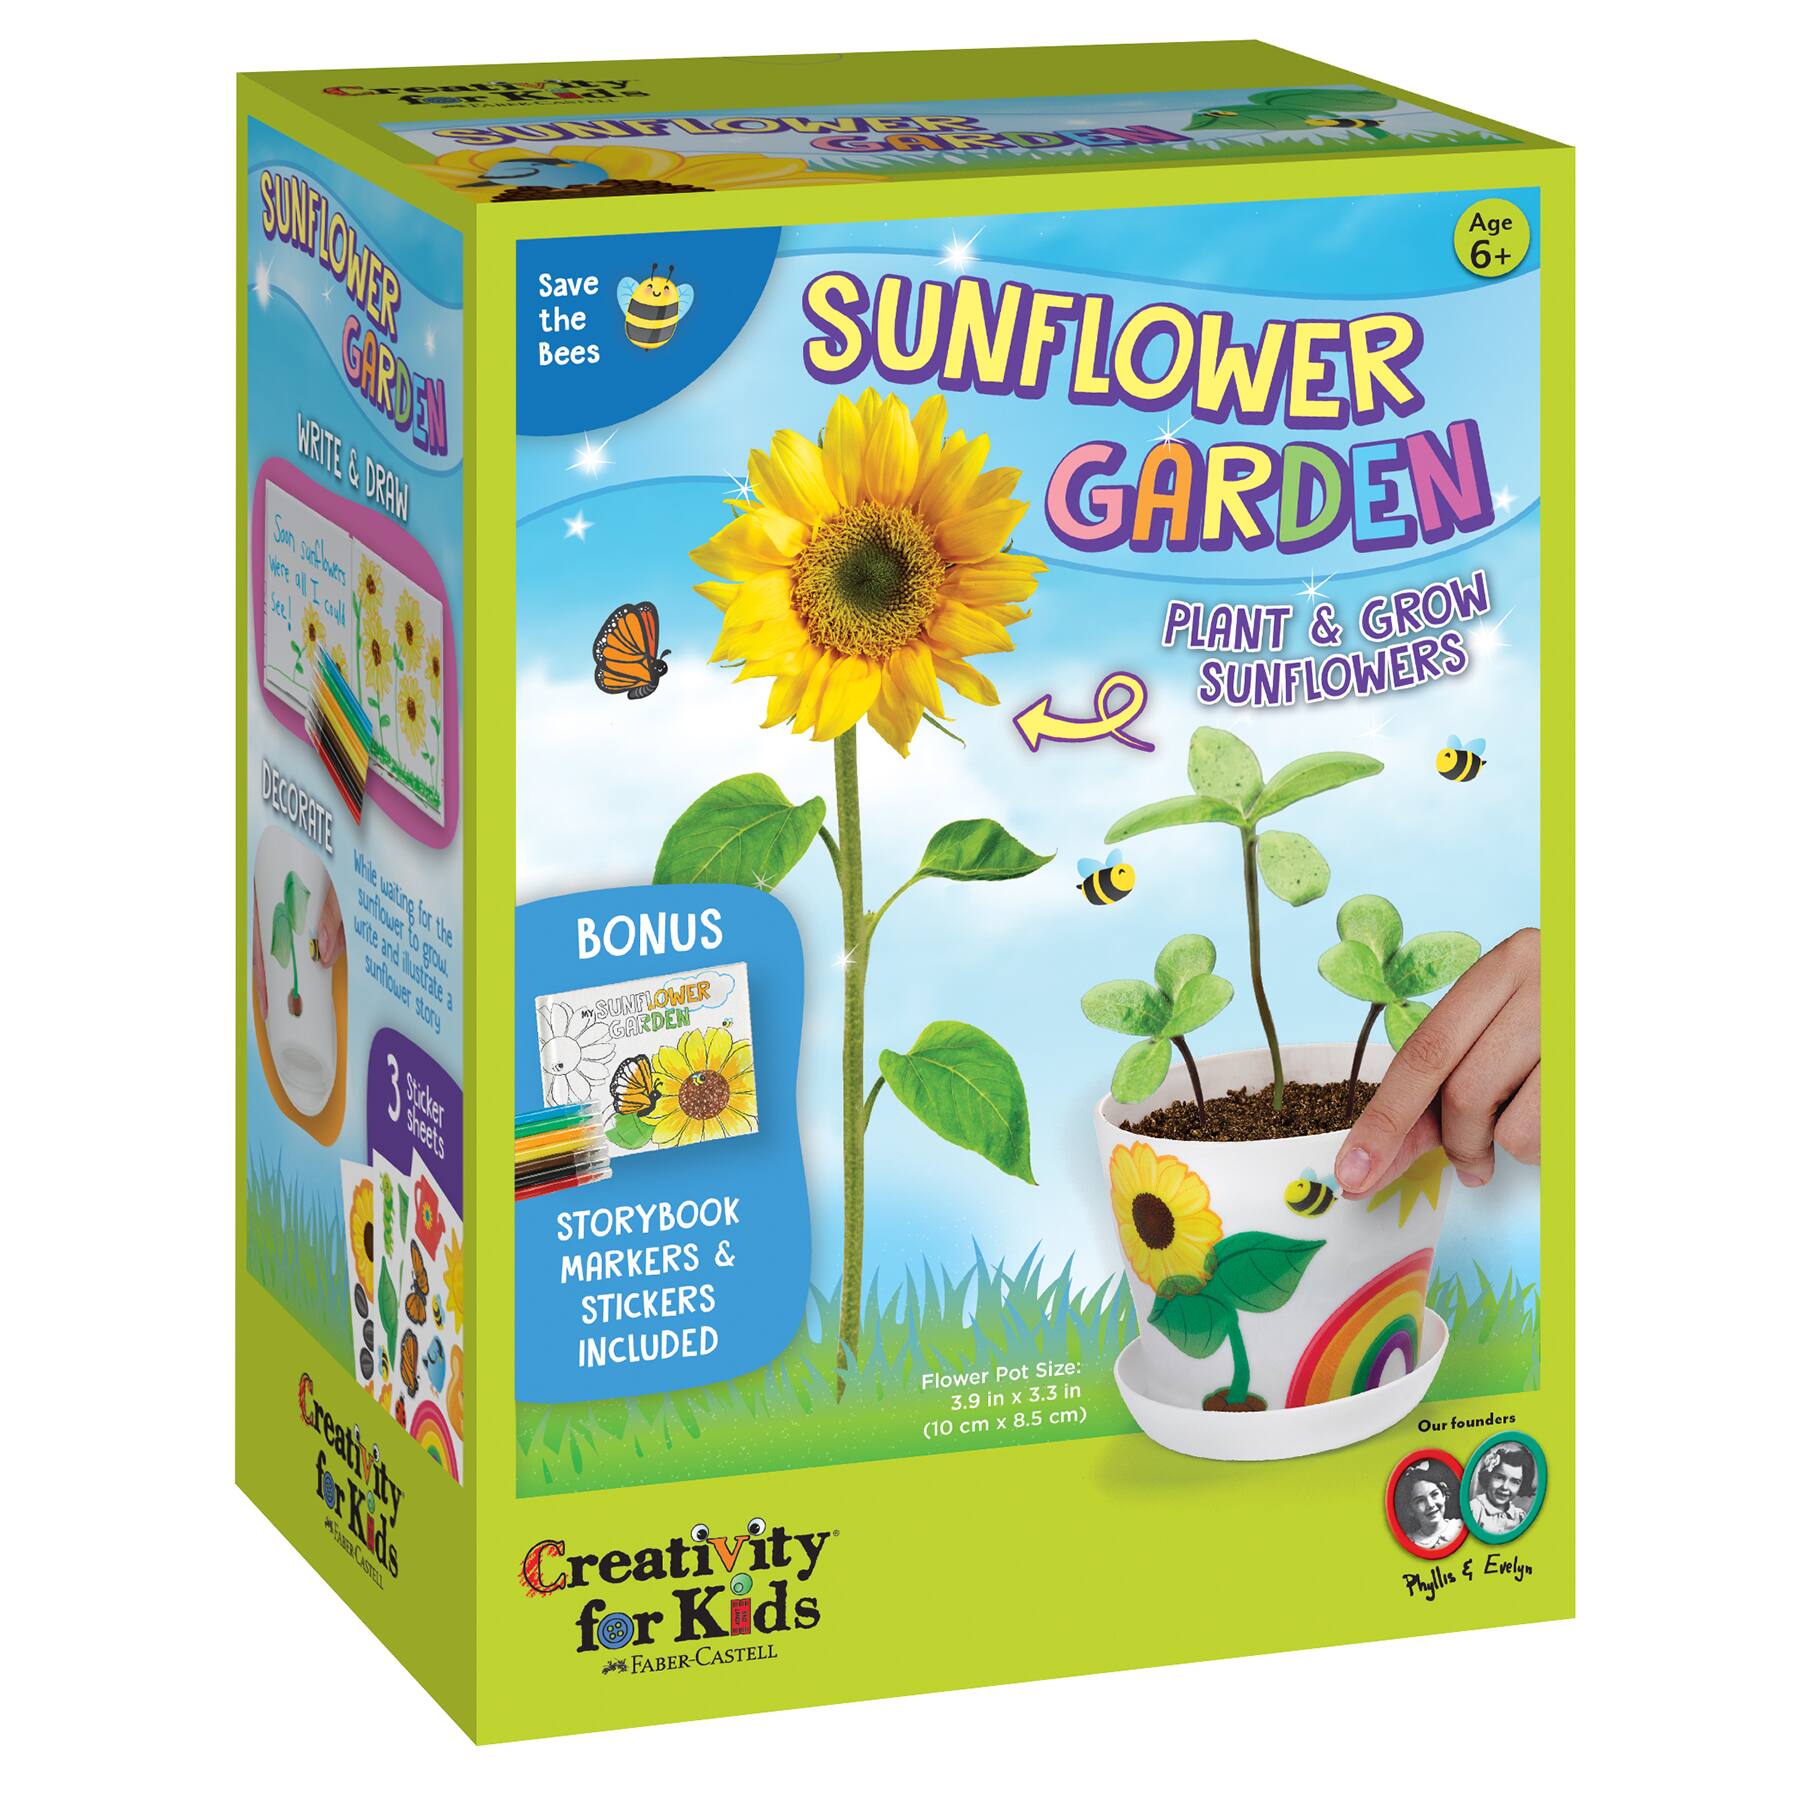 SUNFLOWER GROW by AM 7" x 7" Set of 2 Printed POT HOLDERS